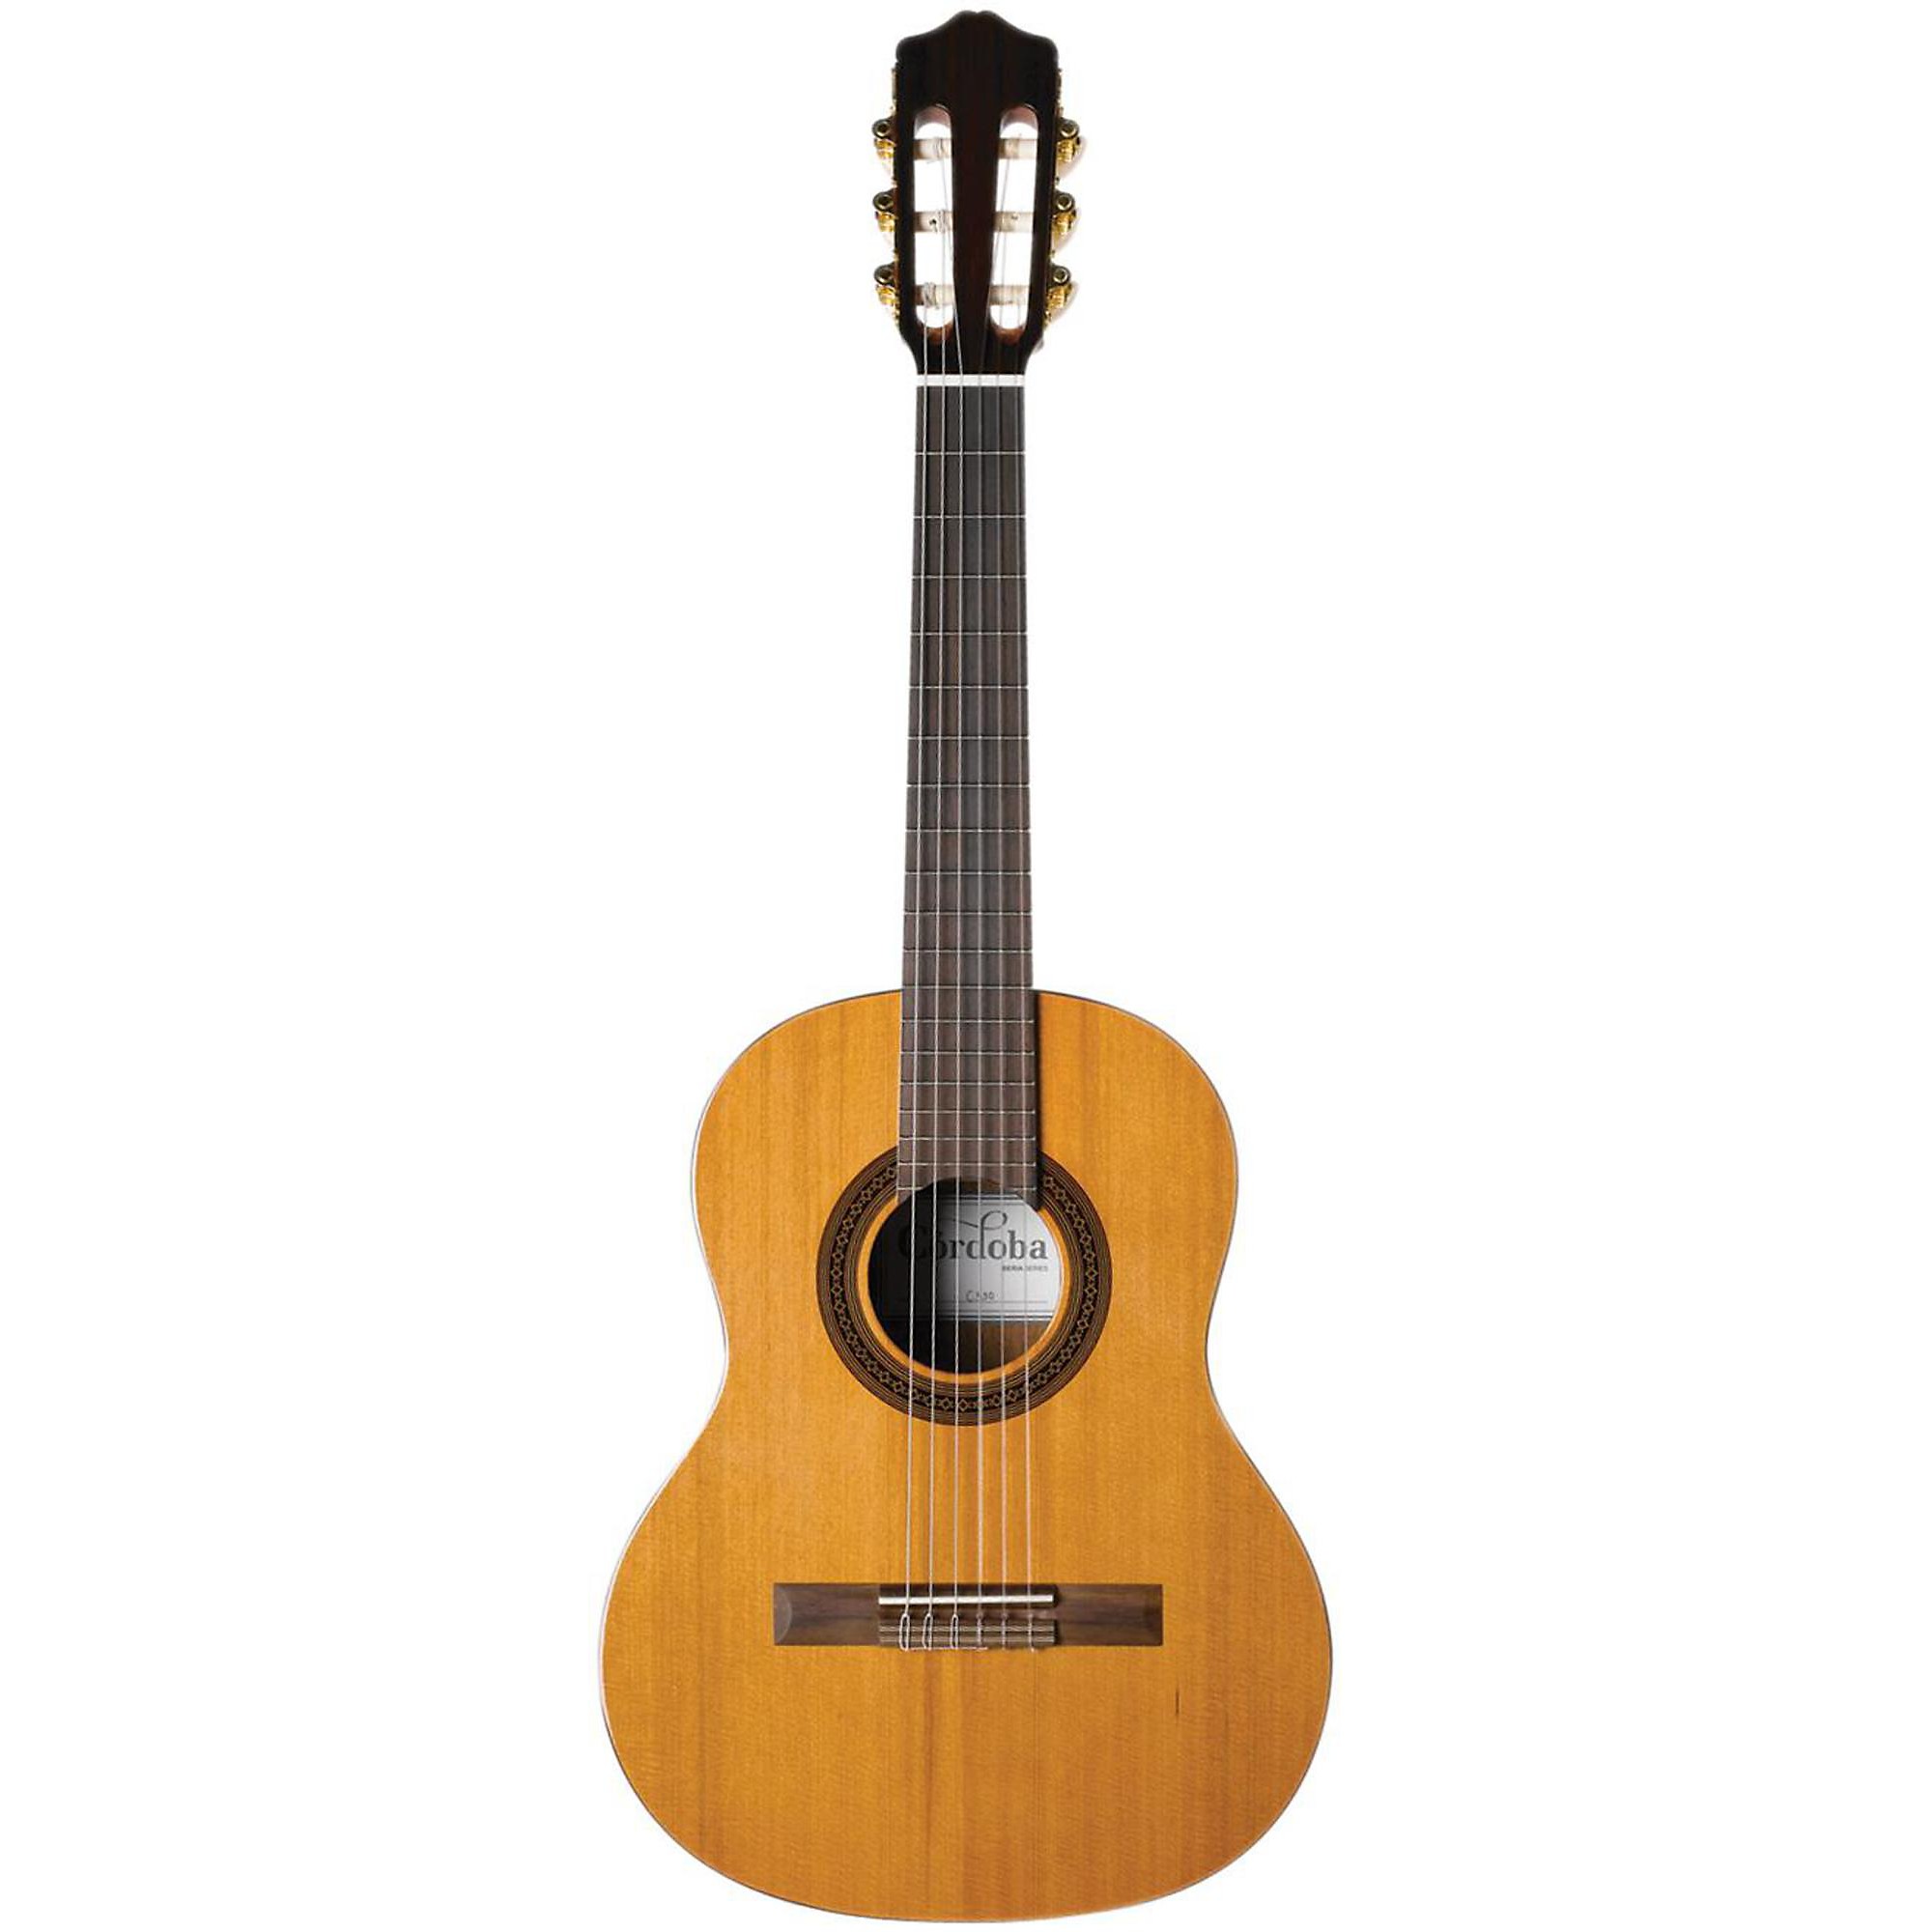 Cordoba Requinto 580 1/2 Size Acoustic Nylon-String Classical Guitar